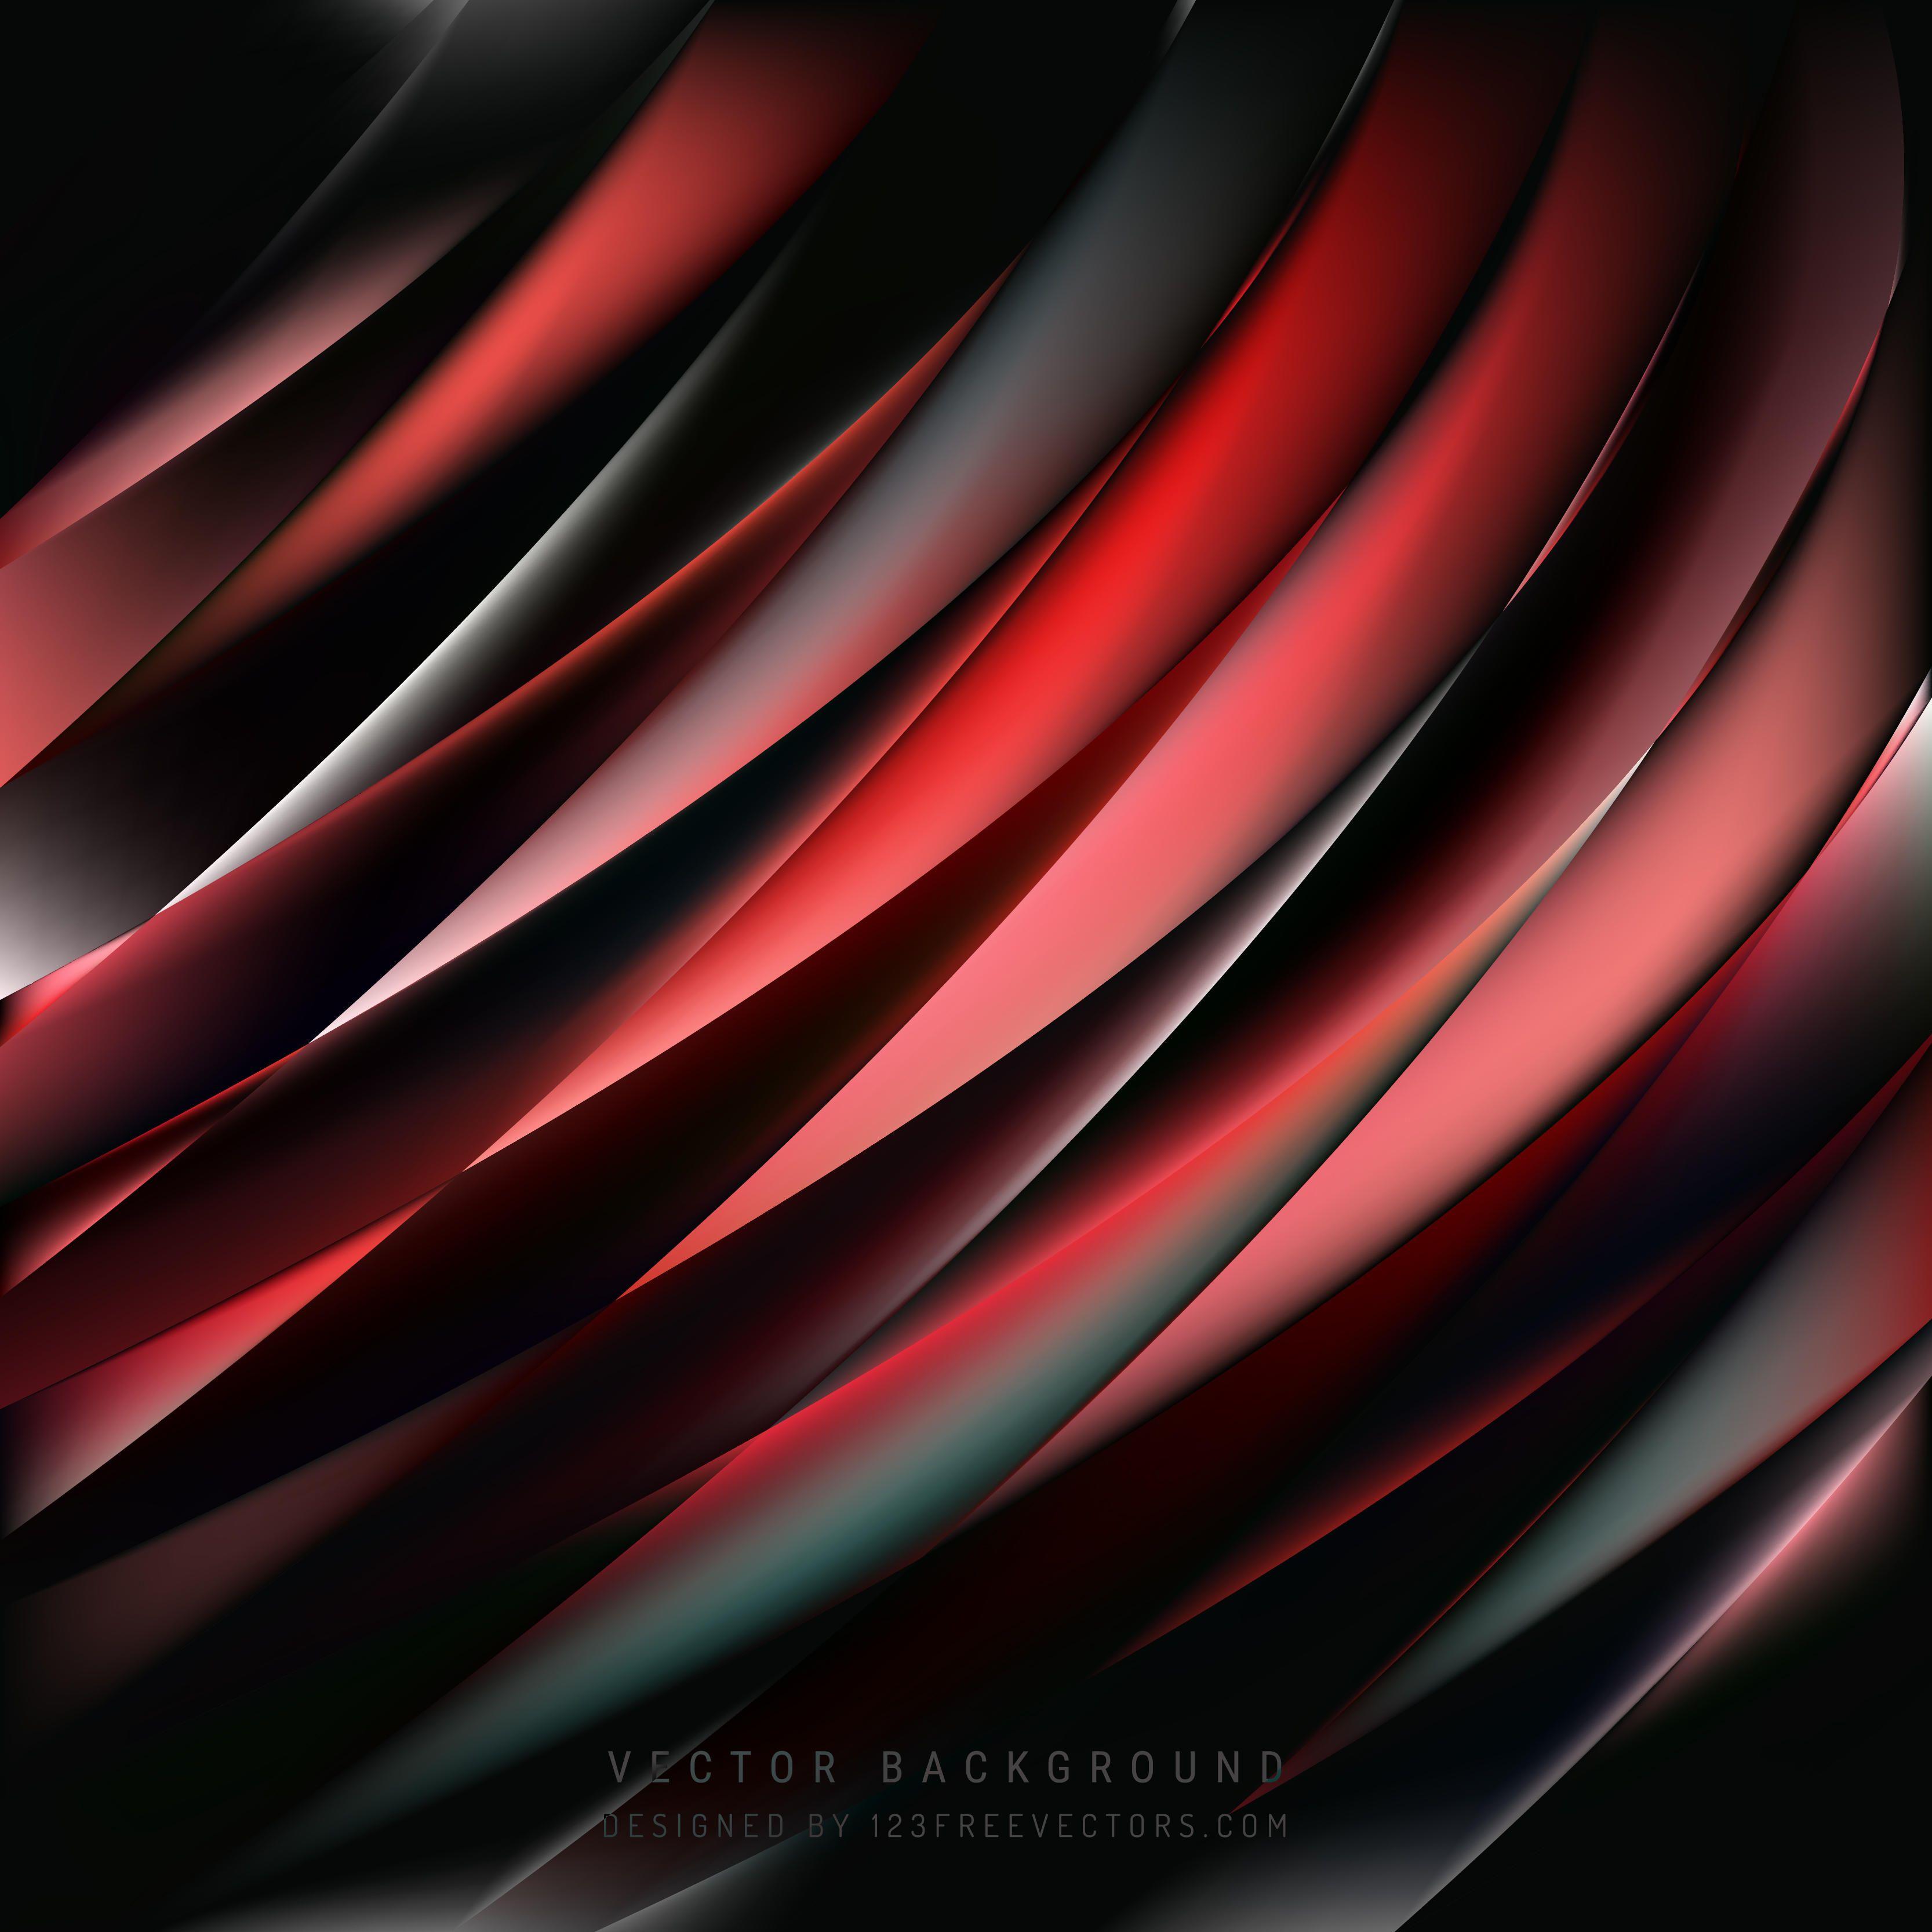 Red and Black Background Vectors. Download Free Vector Art